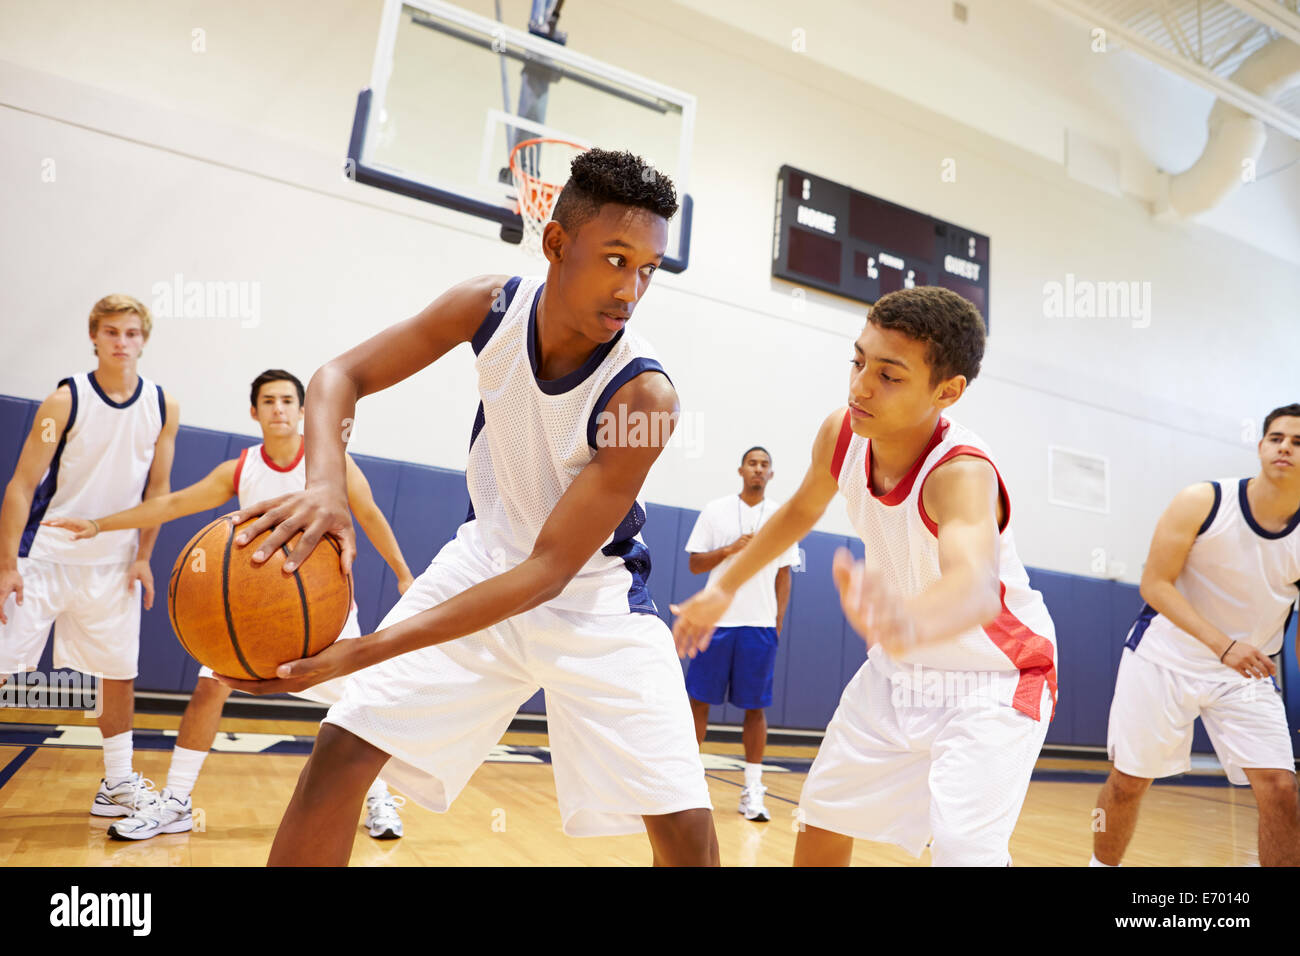 Male High School Basketball Team Playing Game Stock Photo